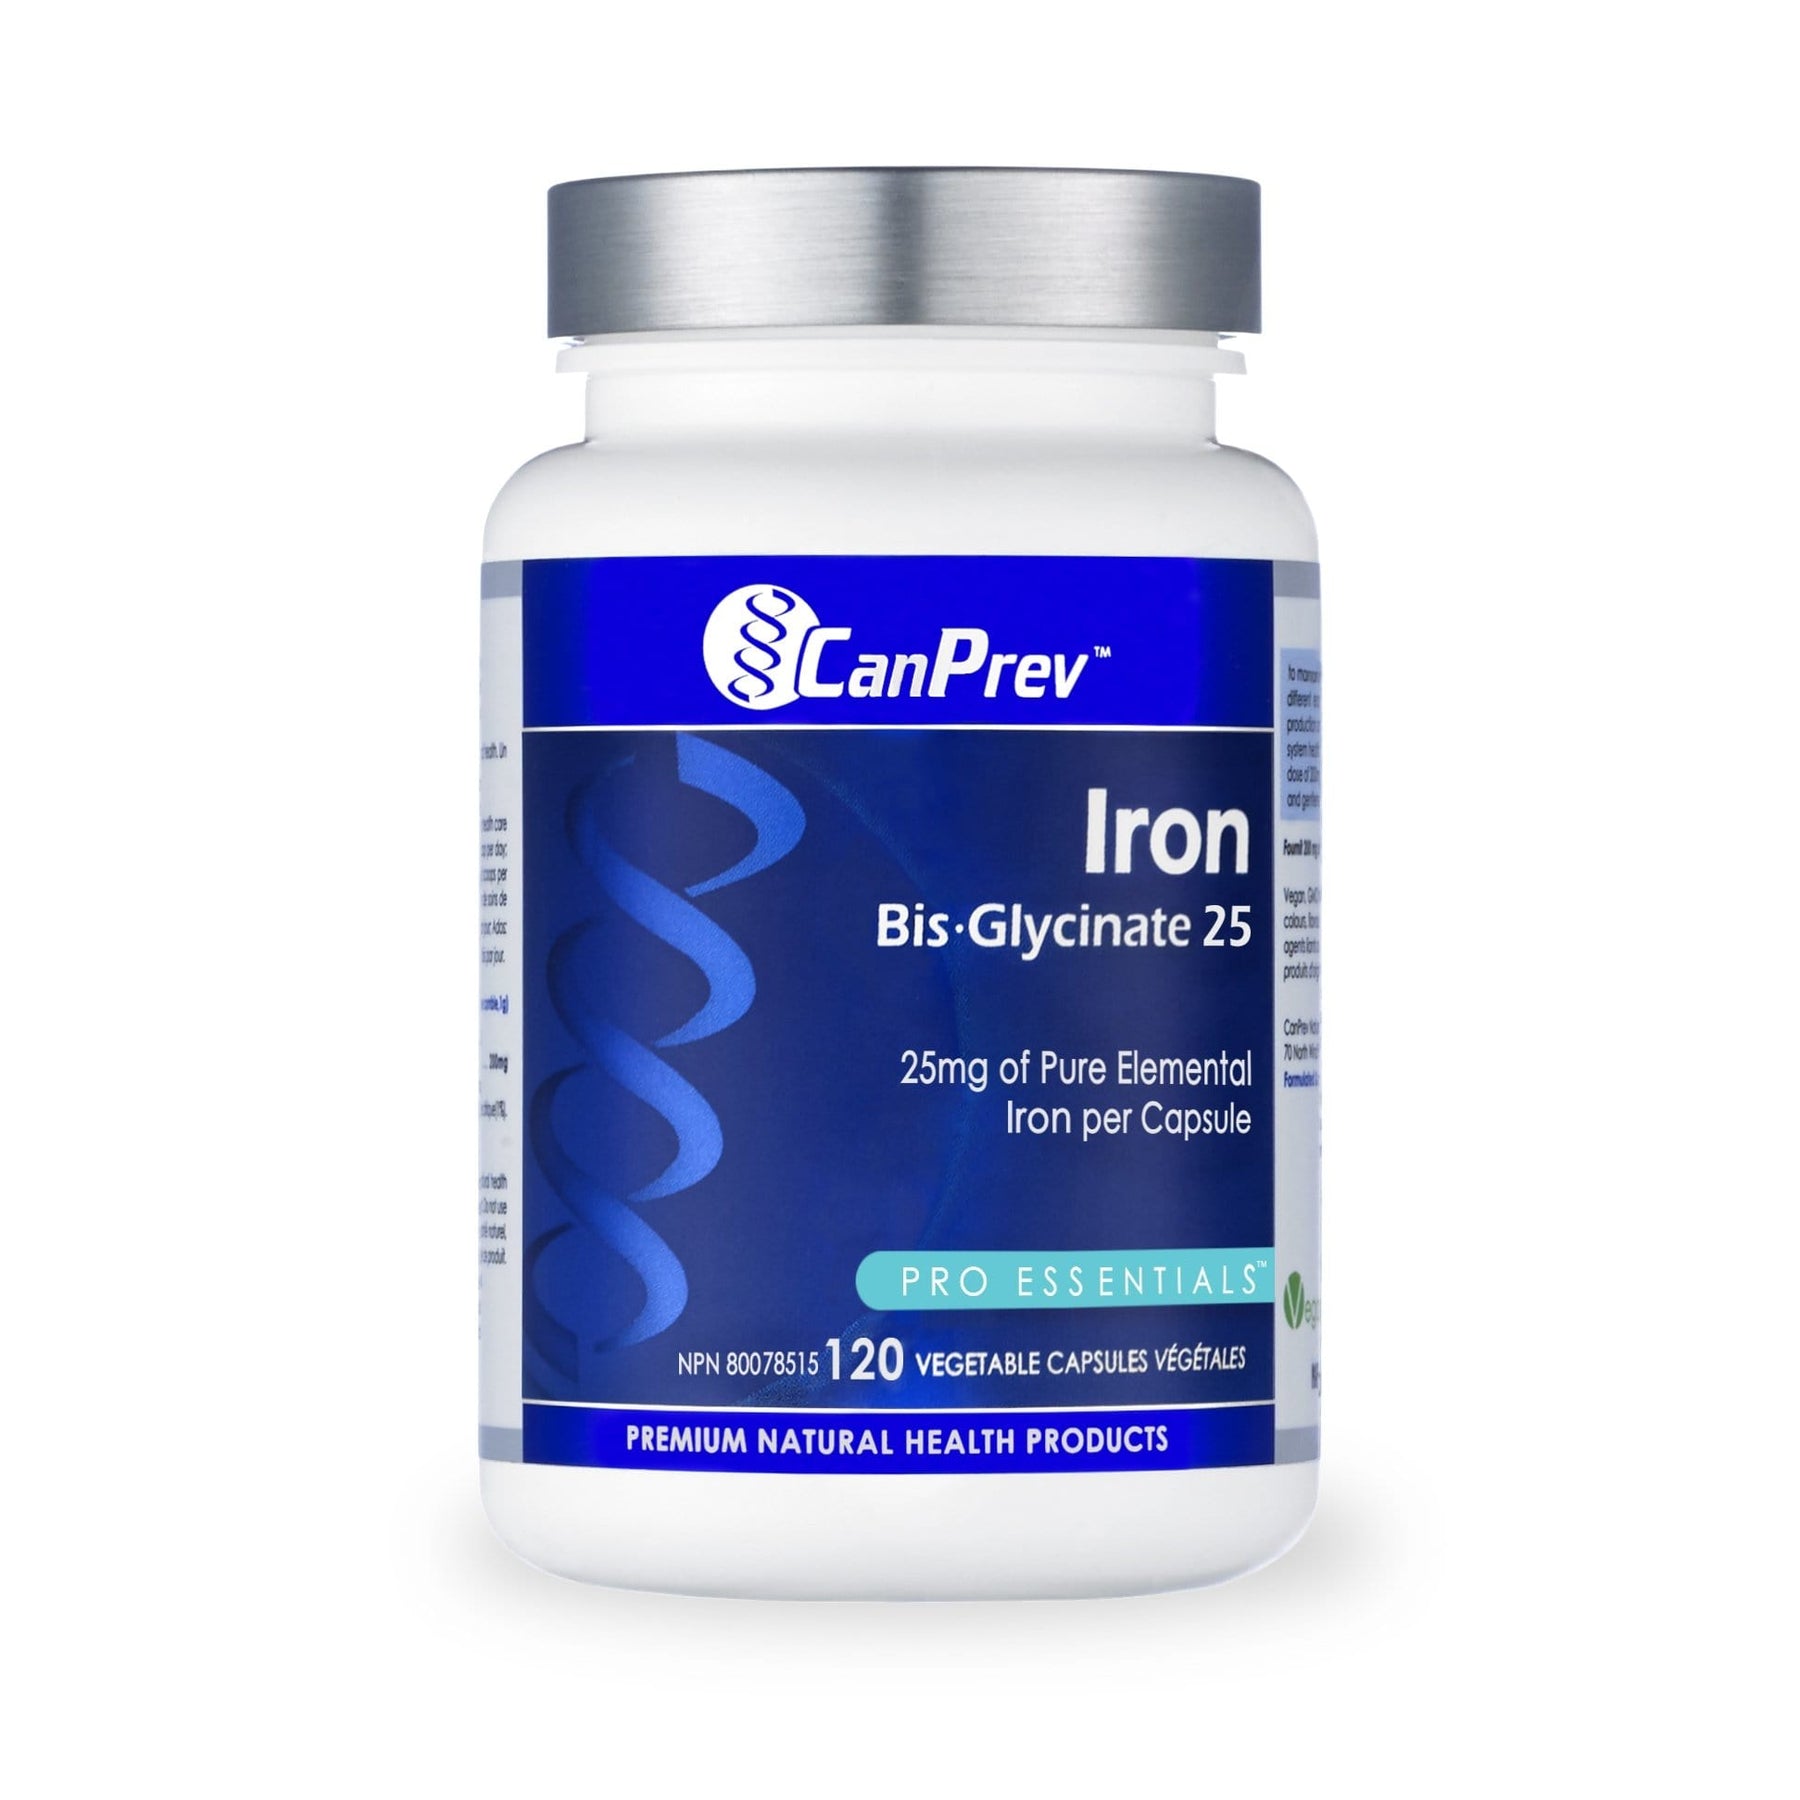 Canprev Iron Bis-Glycinate 25 - by CanPrev |ProCare Outlet|